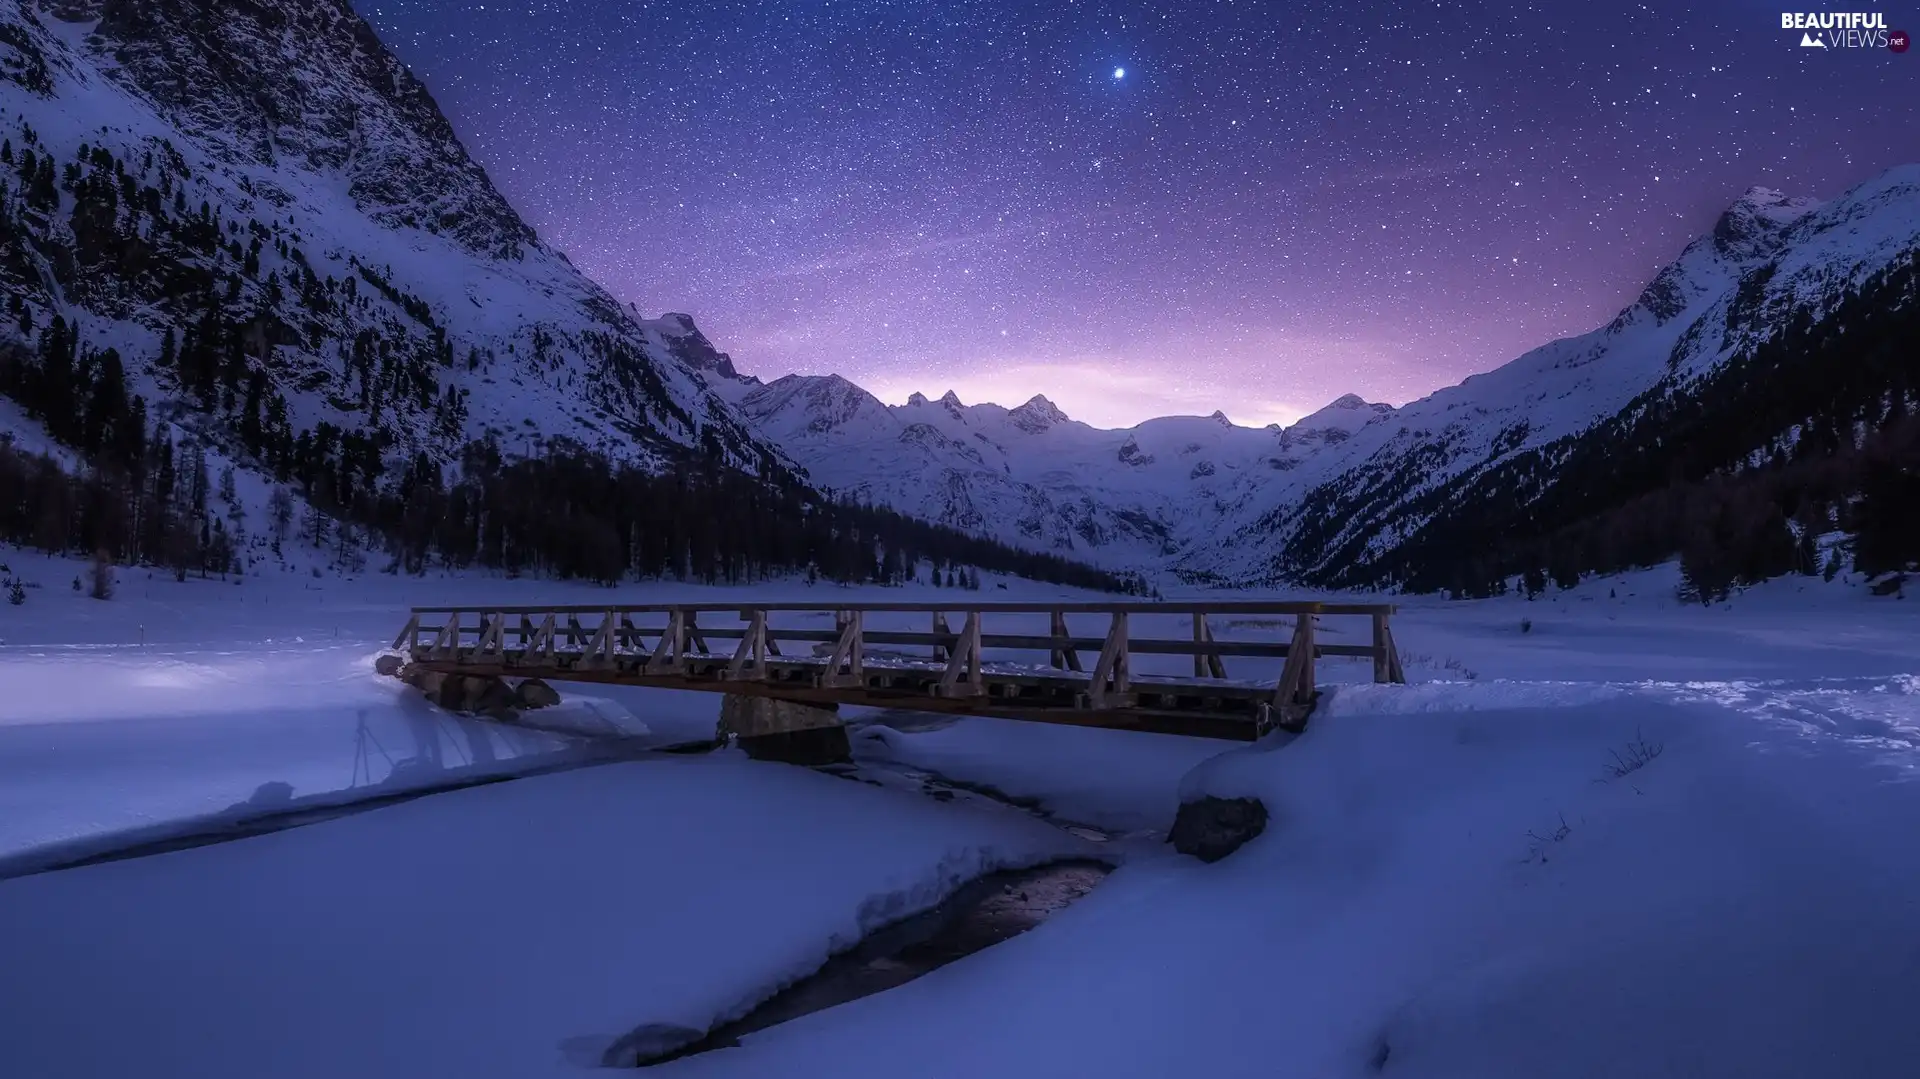 bridges, Mountains, viewes, River, winter, trees, star